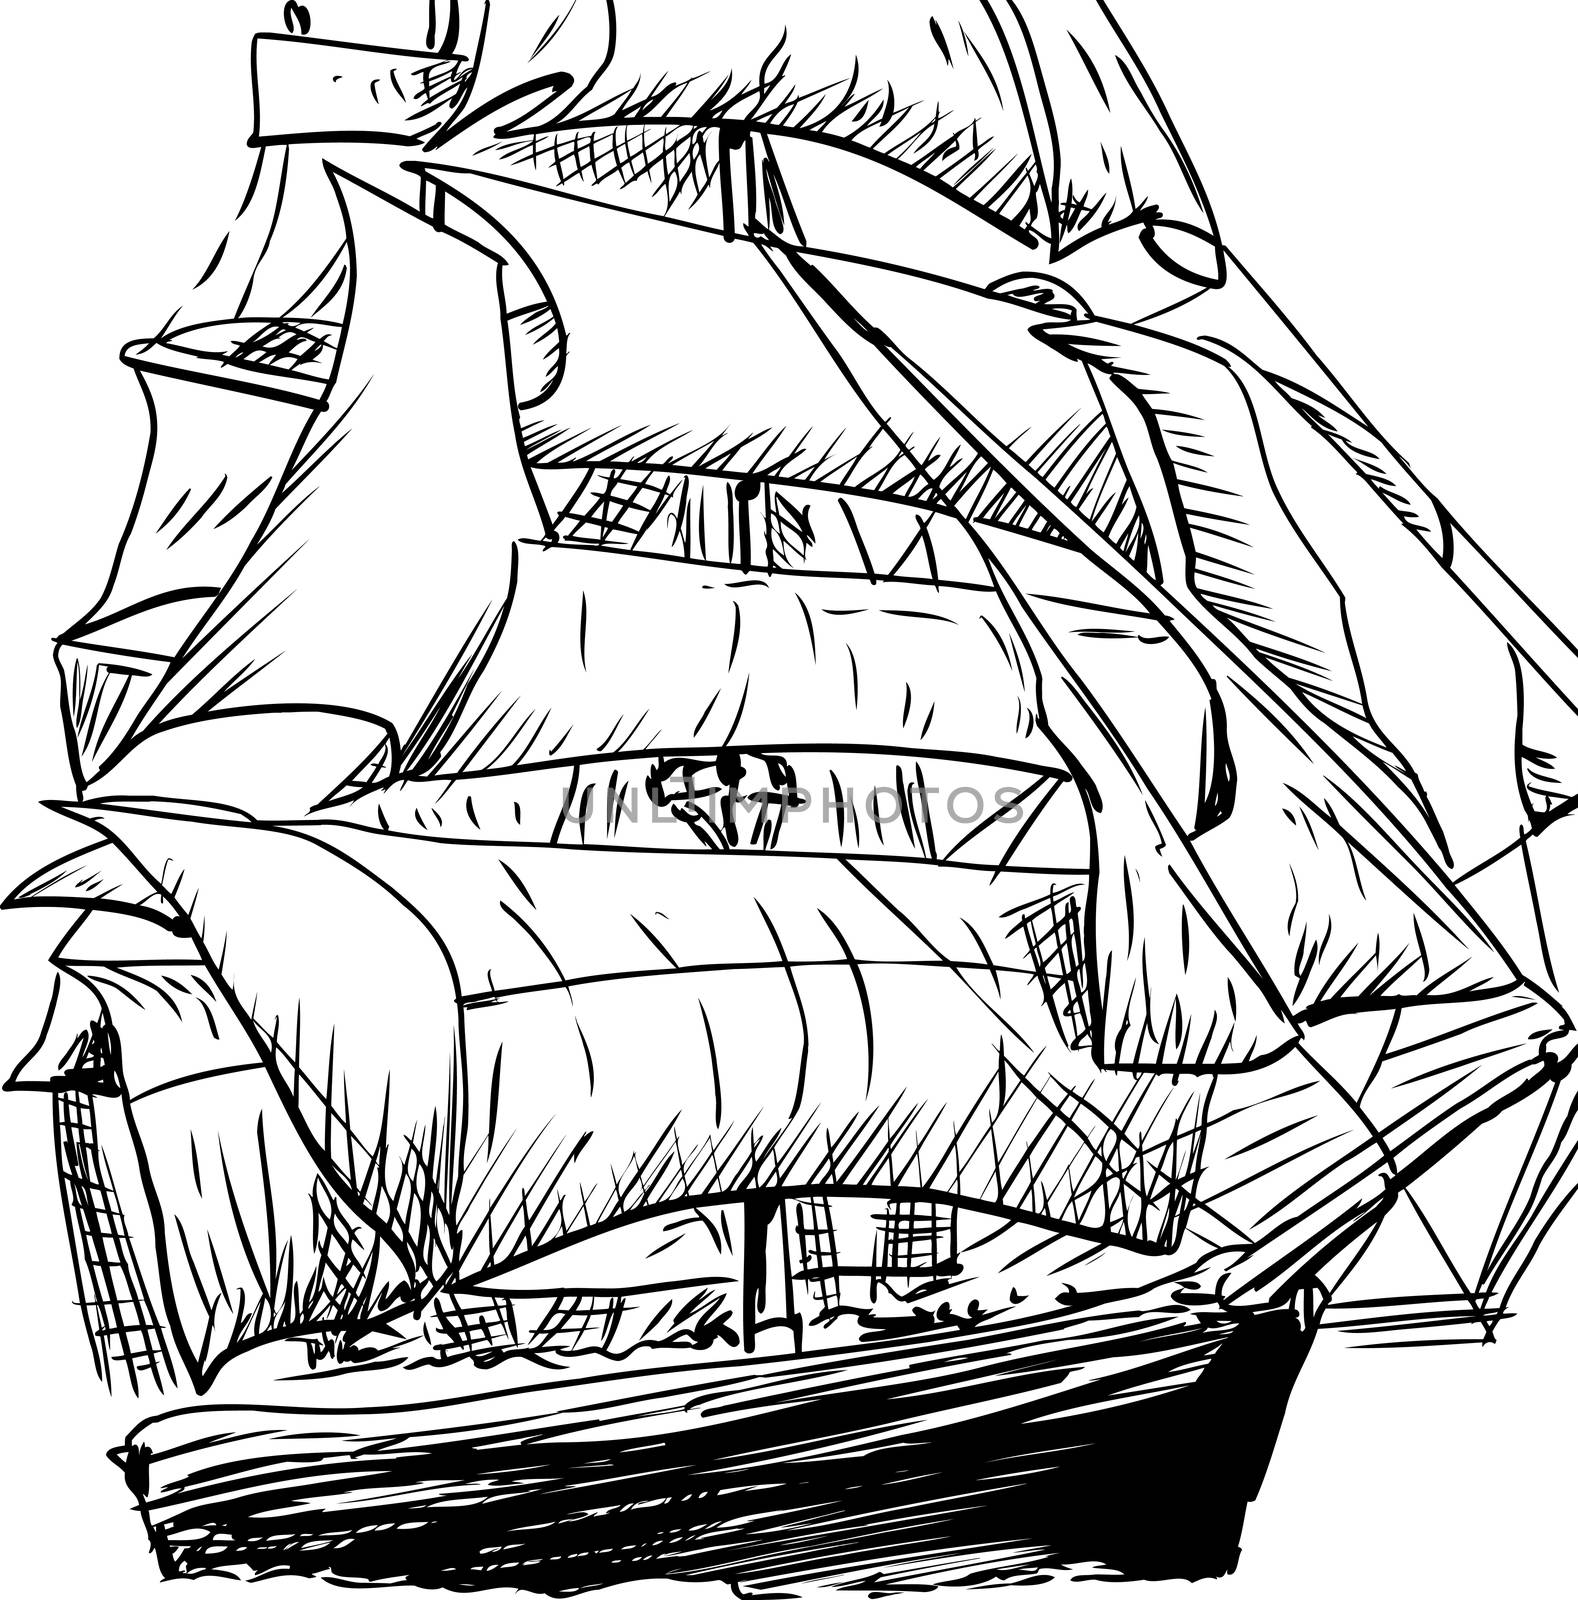 Cropped doodle sketch of 18th century clipper ship